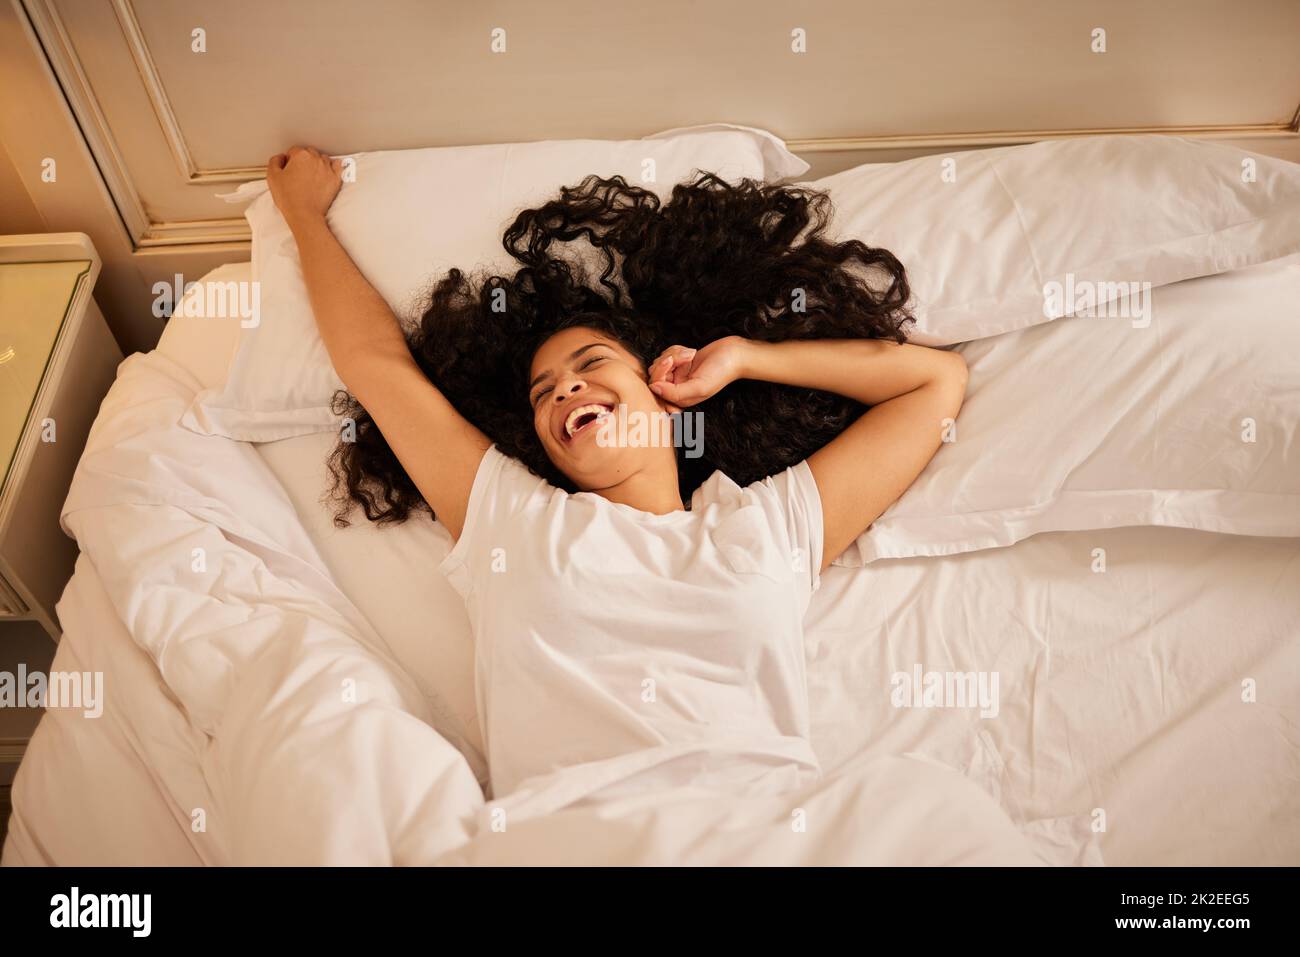 A good nights rest can do wonders for your mood. Shot of a young woman stretching in bed at home. Stock Photo